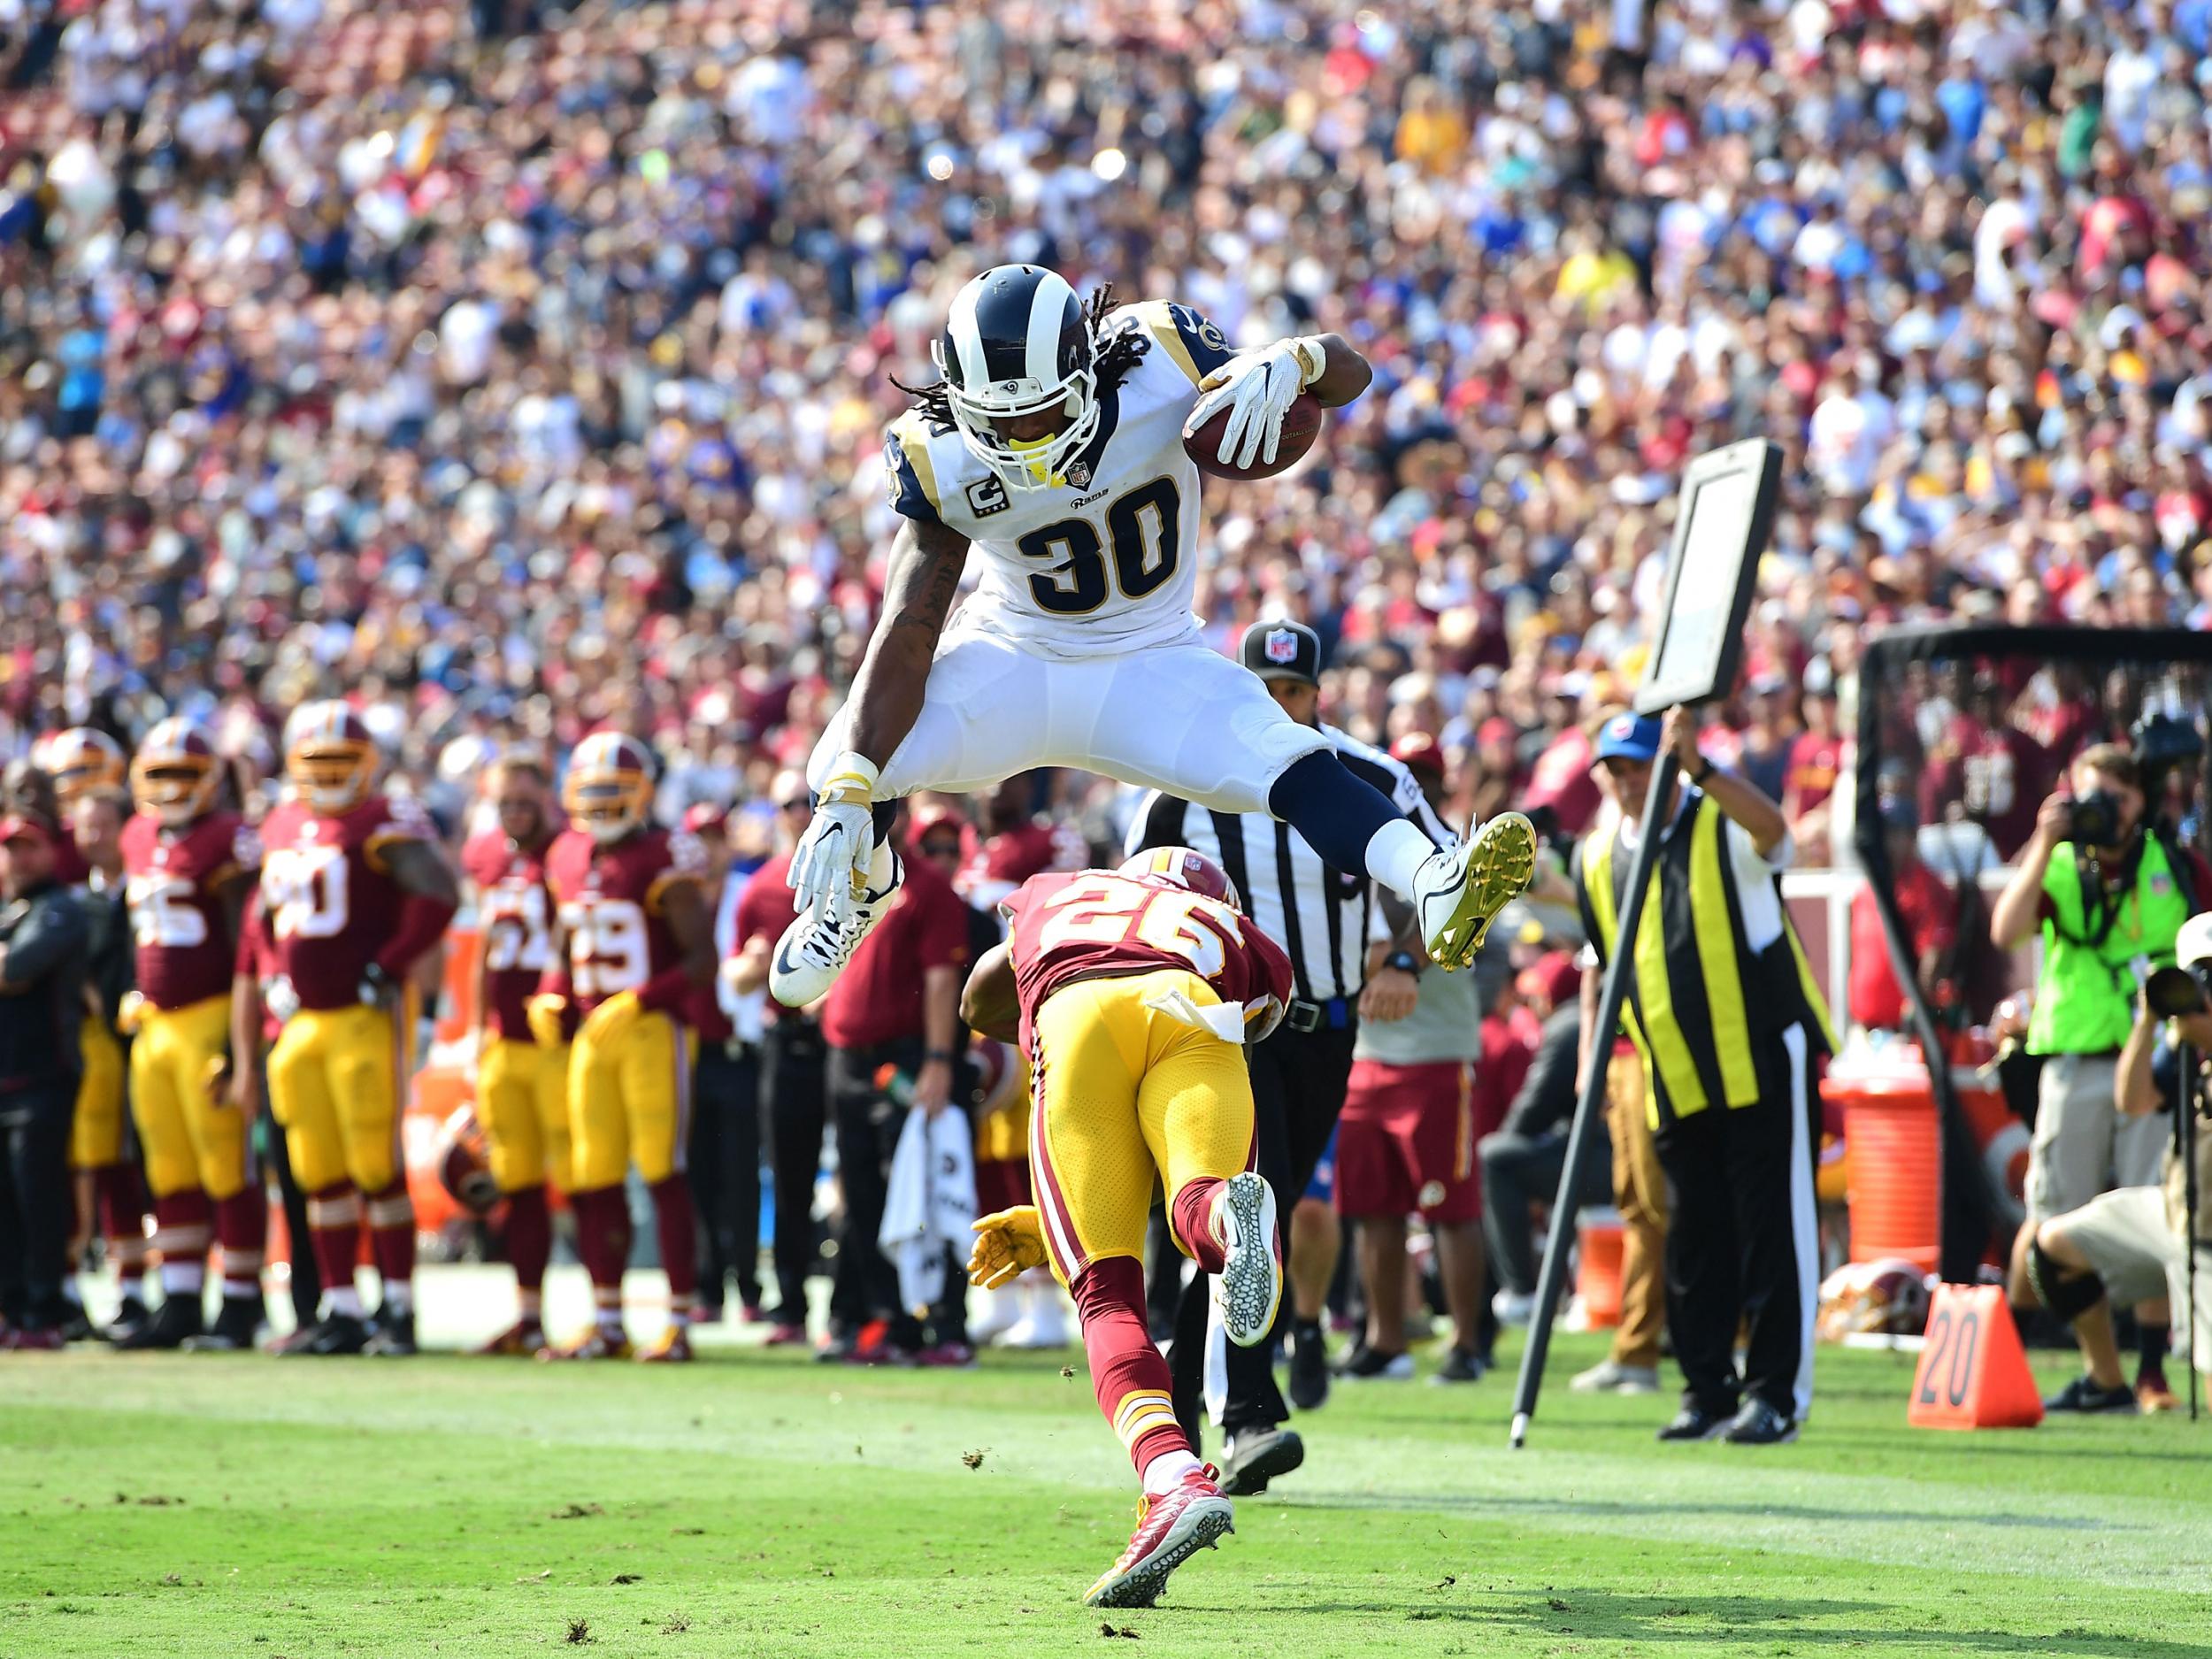 Todd Gurley hurdled a Redskins defender to score for the Rams